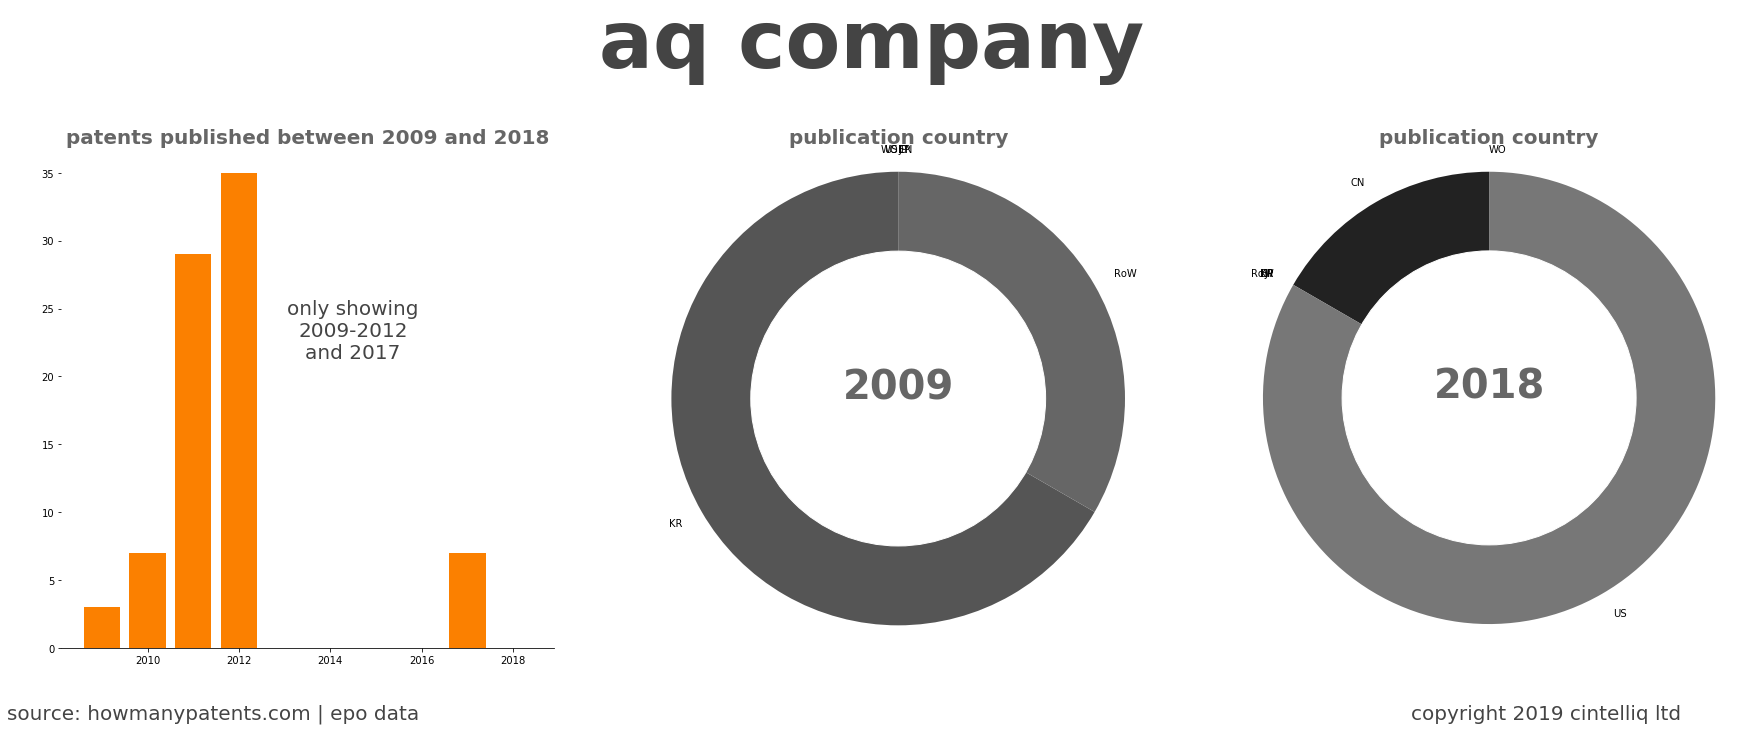 summary of patents for Aq Company